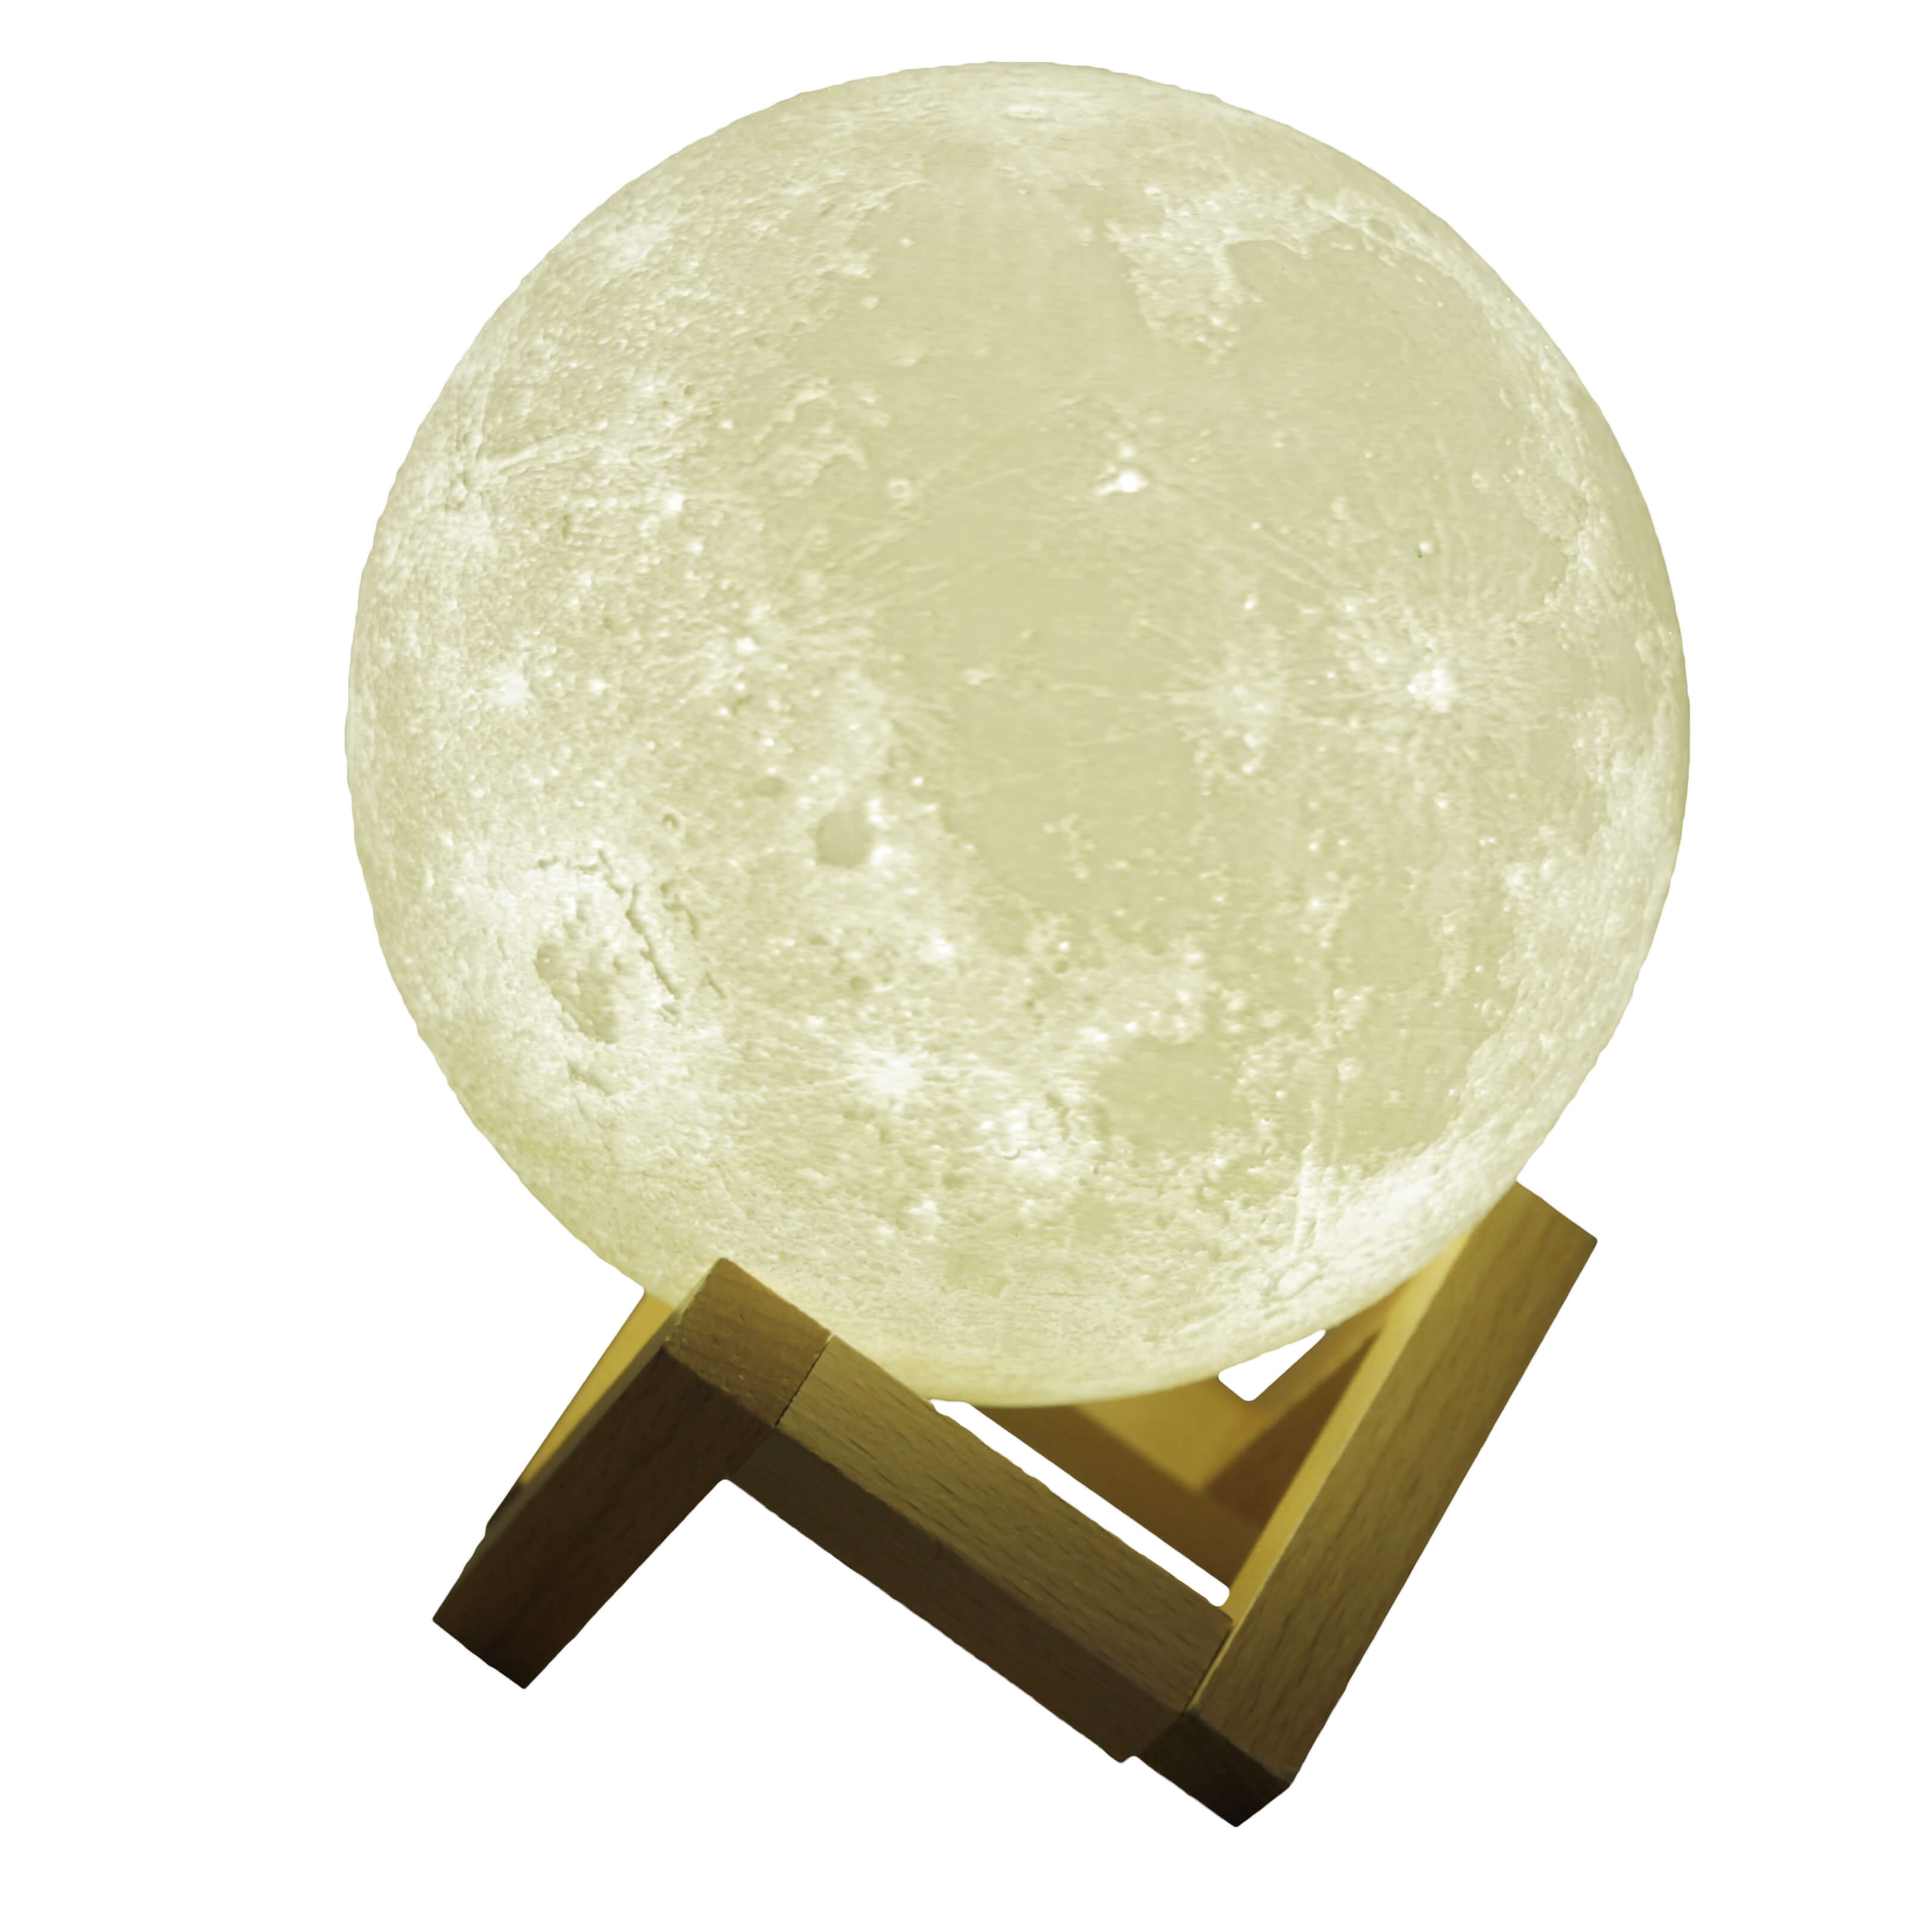 Popular Wooden Stand Remote Touch Control Rechargeable Moon Night Lights Lunar Lamp Round Ball Wireless Music Bedside Speaker